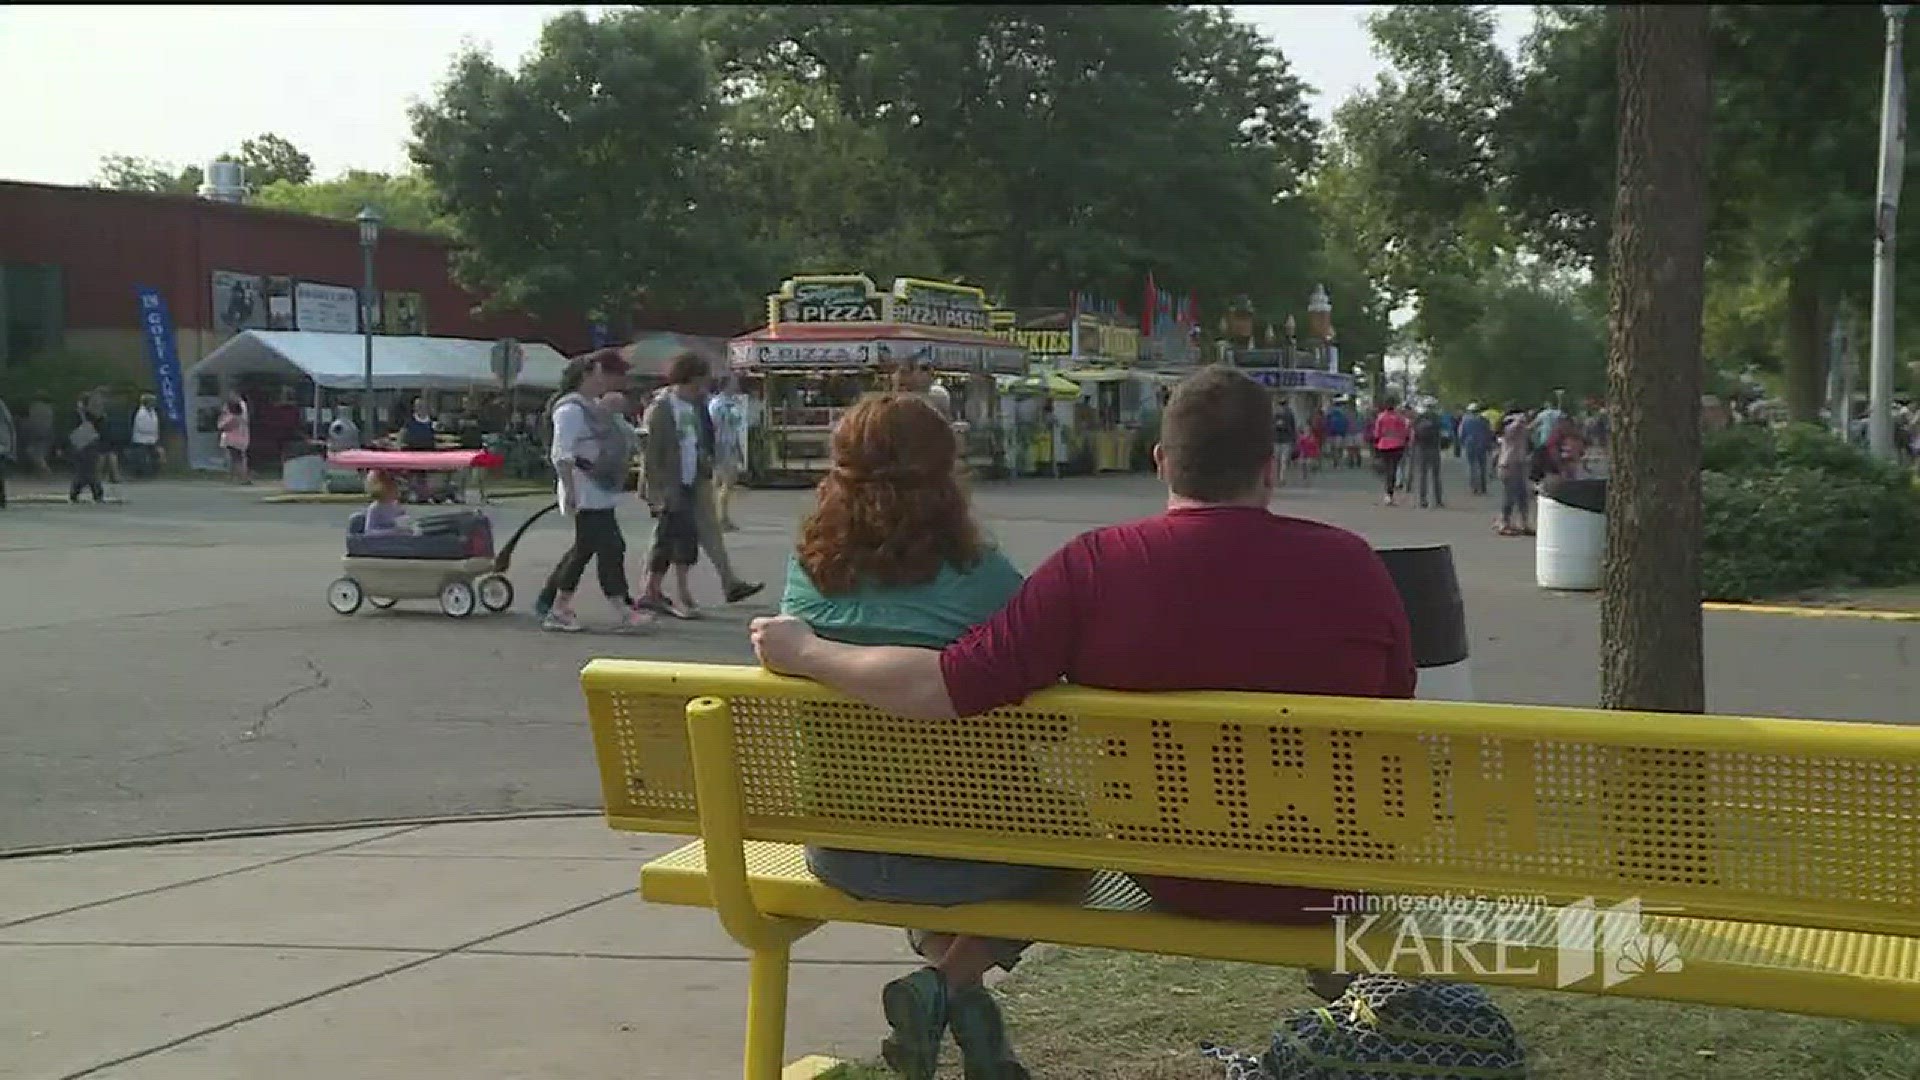 During long days at the fair, it's always nice to find an empty bench to get off your feet. Many of those benches are dedicated to someone special - including one that honors Jo and Gavin Nachtigall's baby boy, Howie. http://kare11.tv/2eWZIIq